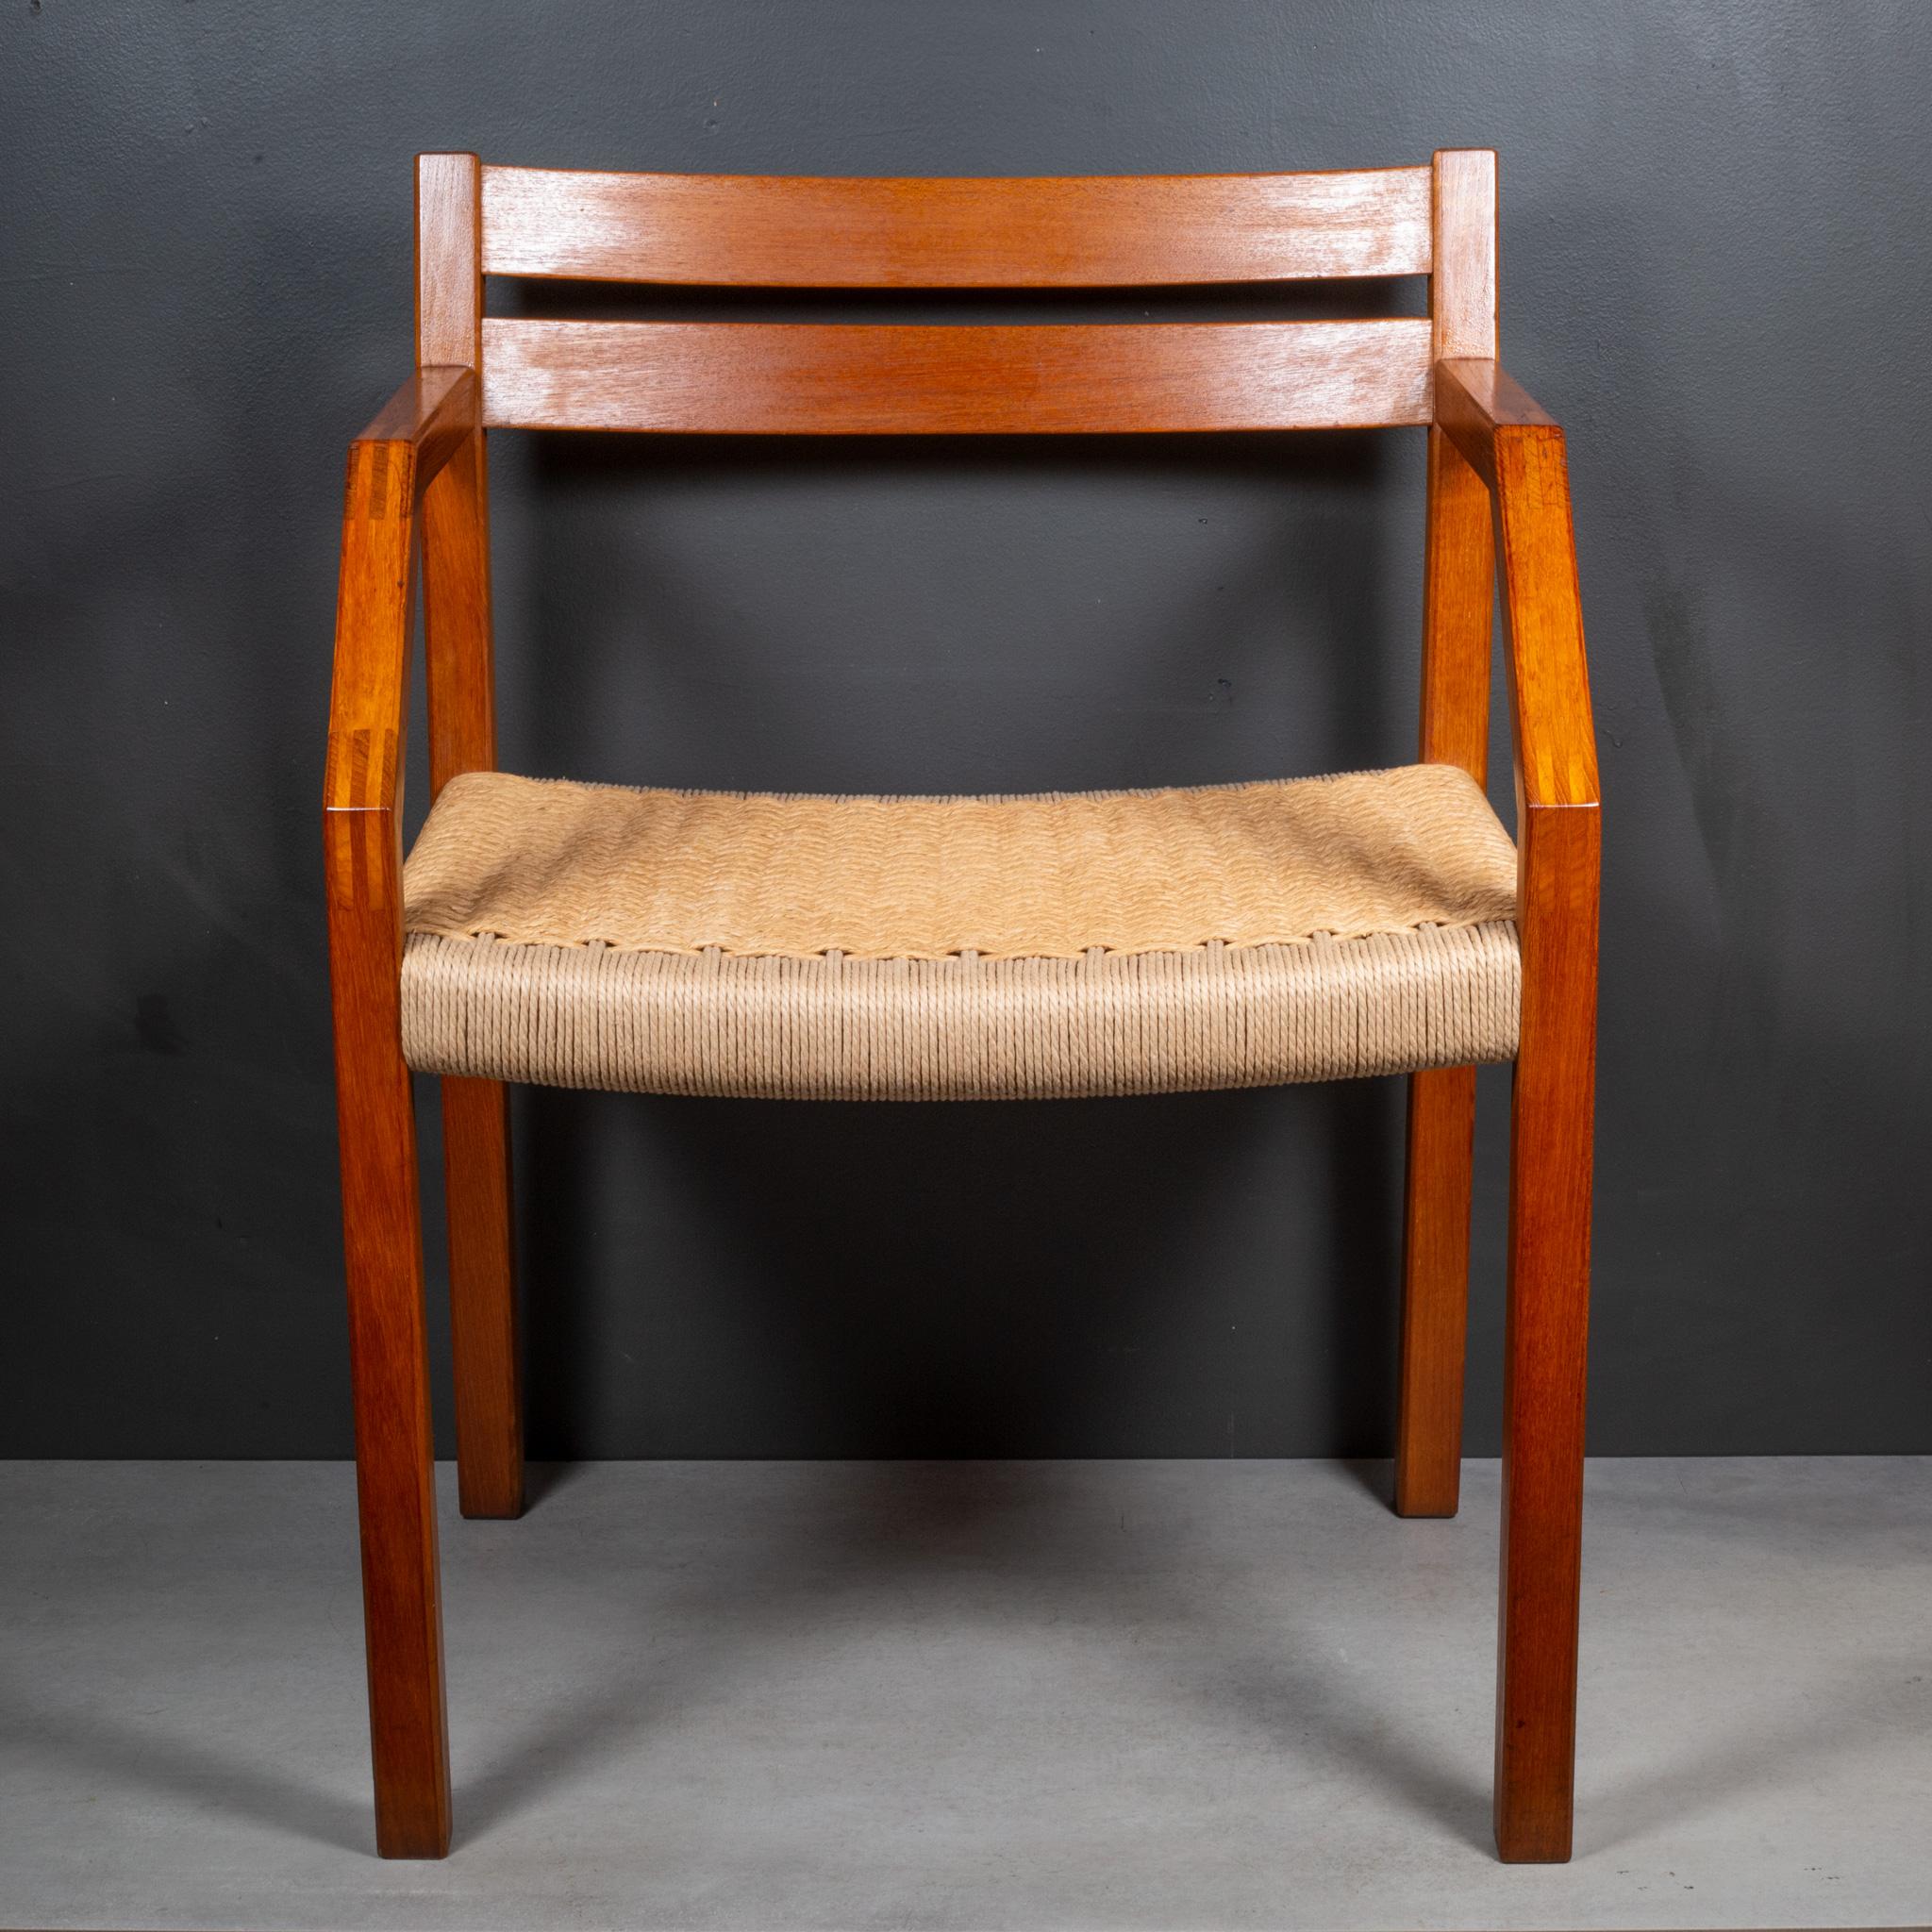 ABOUT

May sell separately. Price is per chair.

A pair of rare J.L. Moller Model #404 dining/desk armchairs, designed in 1974 by Jorgen Henrik Moller for J.L. Moller Mobelfabrik of Denmark. The chairs are crafted of solid teak and paper cord seats.